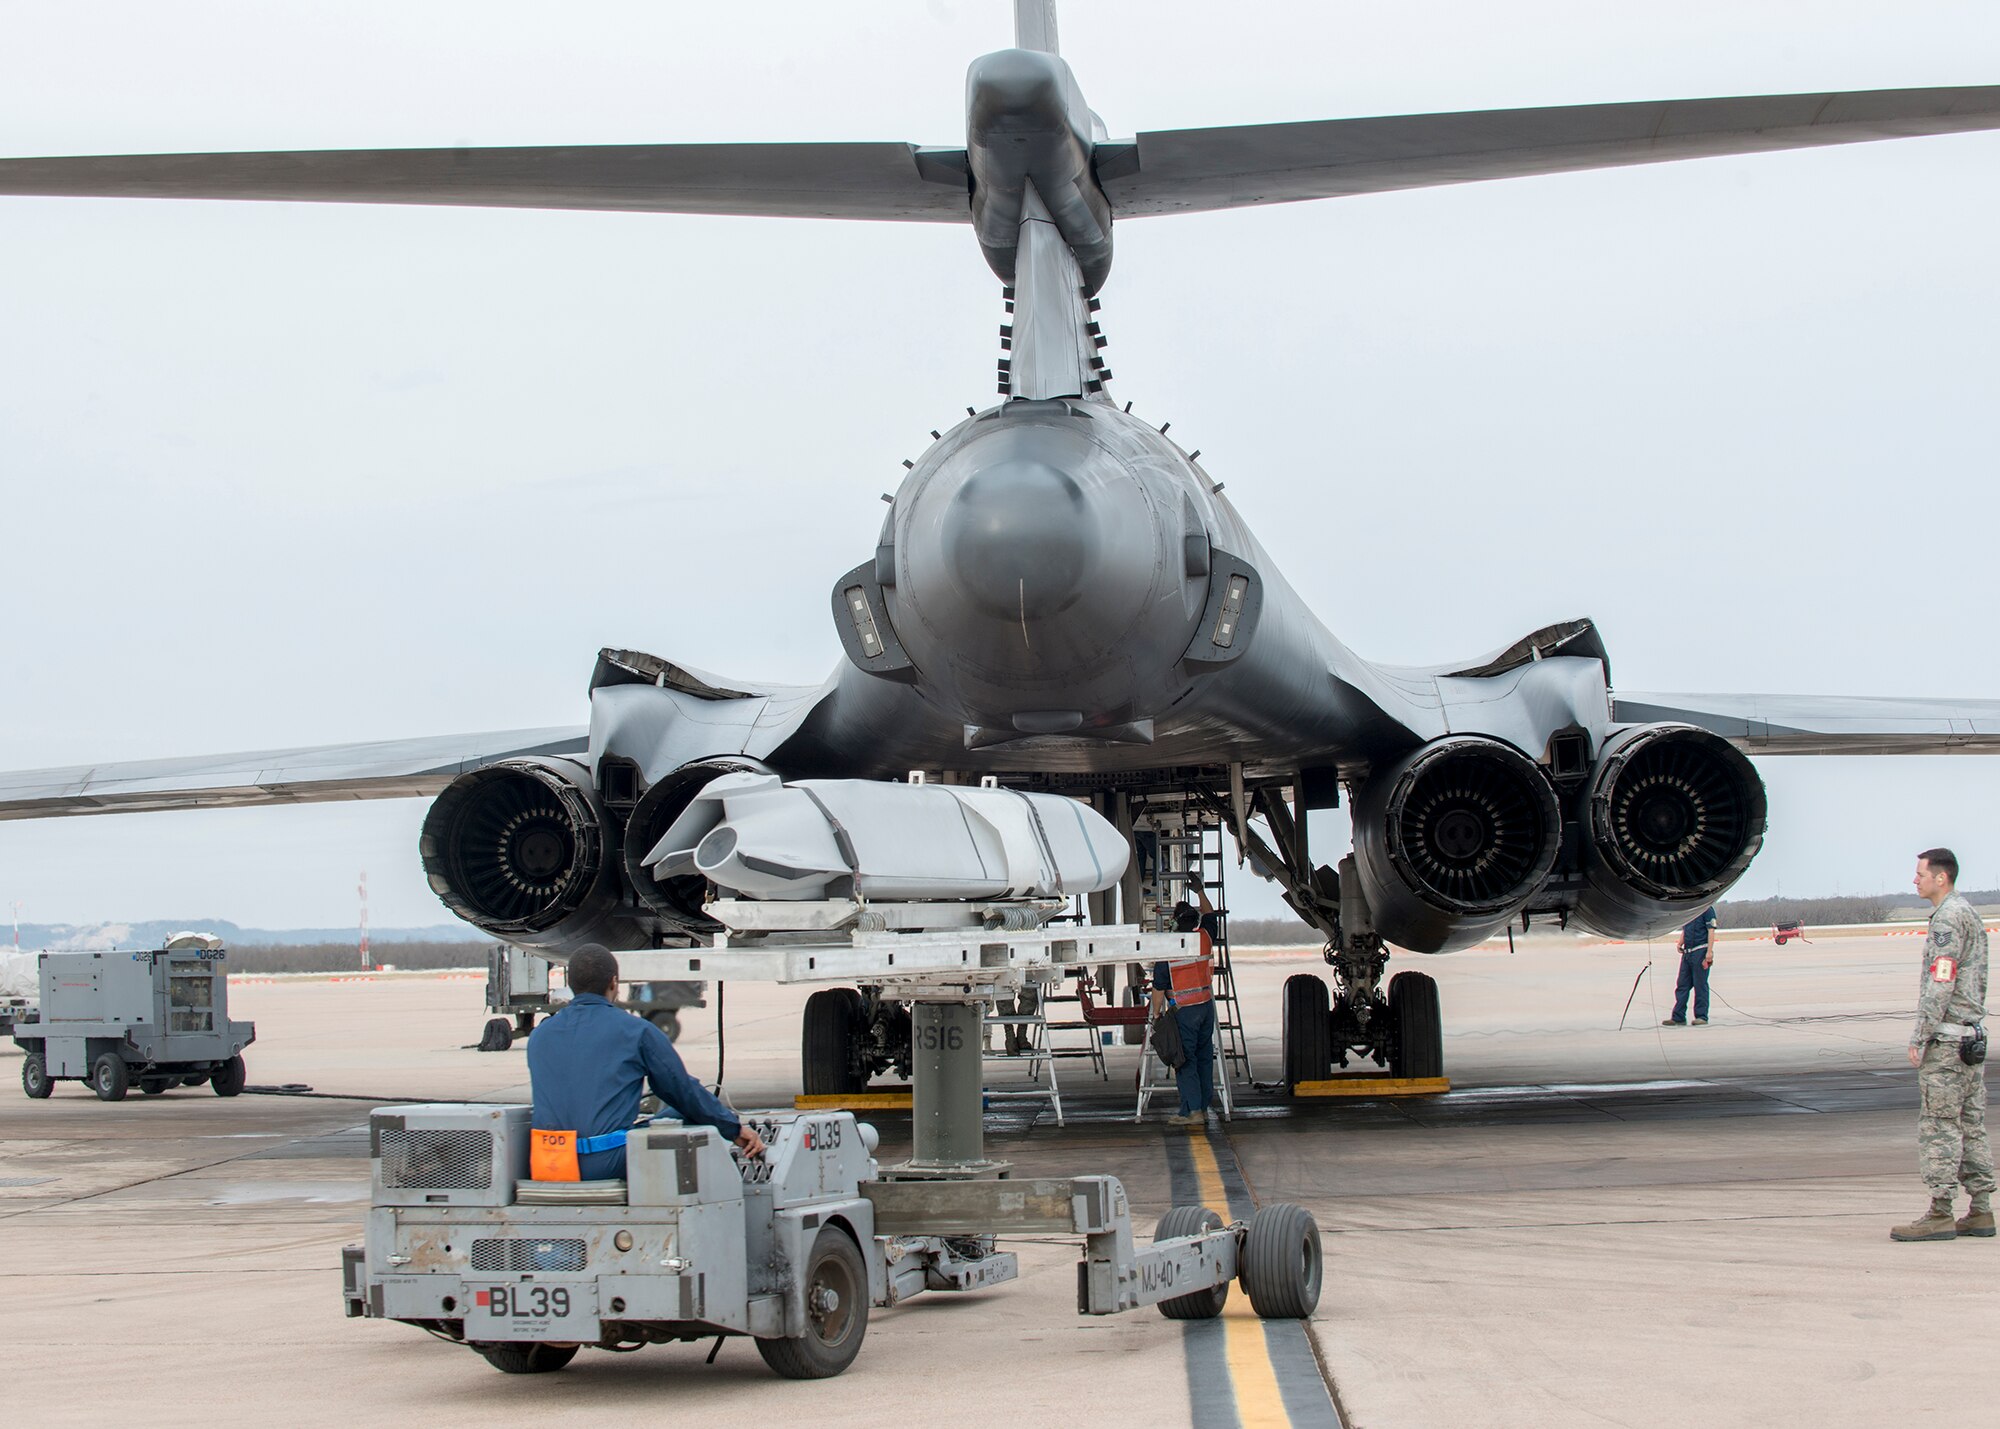 Airmen assigned to the 7th Maintenance Group load an inert Joint Air-to-Surface Standoff Missile at Dyess Air Force Base, Texas, in a B-1B Lancer Feb. 21, 2016, during a B-1 Combat Mission Effectiveness exercise. Maintenance personnel had 48 hours to successfully load and prepare to launch six B-1s with JASSM and Joint Direct Attack Munitions in the Lancers’ three bomb bays. Maintenance personnel were successful in launching all six jets and preparing themselves at the same time to deploy within the two-day window to support the aircraft. (U.S. Air Force photo by Airman 1st Class Austin Mayfield/Released)
